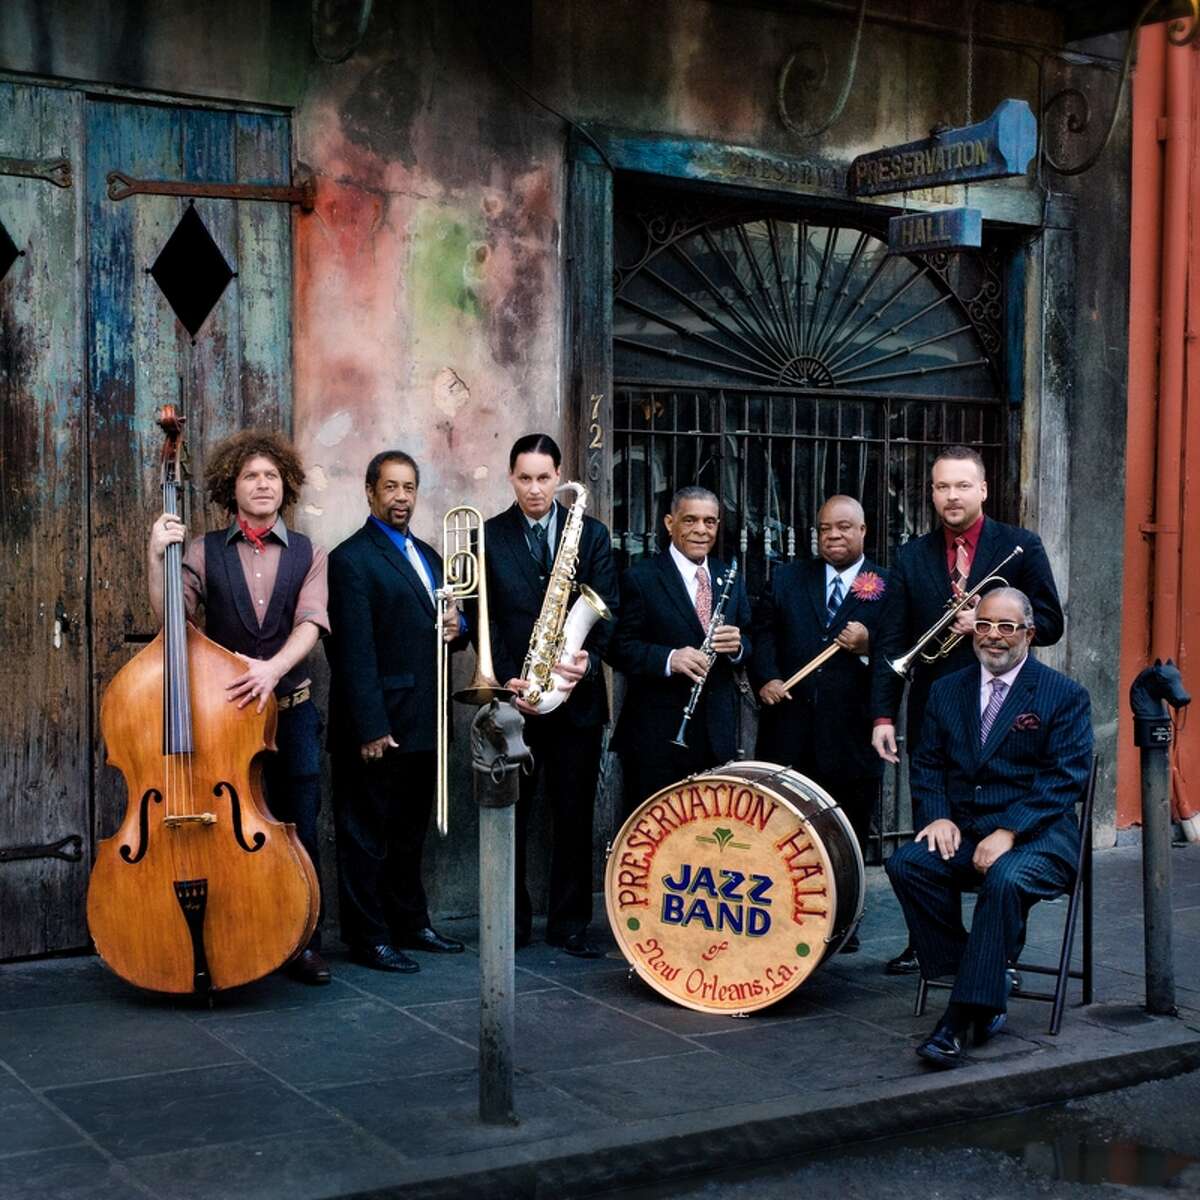 French Quarter institution Preservation Hall exists to preserve New Orleans jazz tradition. Under the direction of bass player Ben Jaffe, son of founder Allan Jaffe, the hall’s touring band proves tradition doesn’t stand still, whether it’s showcasing its music on rock festival stages or creating original songs that blend the band’s sound with varied styles, such as the Afro-Cuban rhythms on this year’s “So It Is.” Friday’s concert is billed as a “Creole Christmas.” 7:30 p.m. Friday. Charline McCombs Empire Theatre, 226 N. St. Mary’s St. Sold out. majesticempire.com -- Jim Kiest